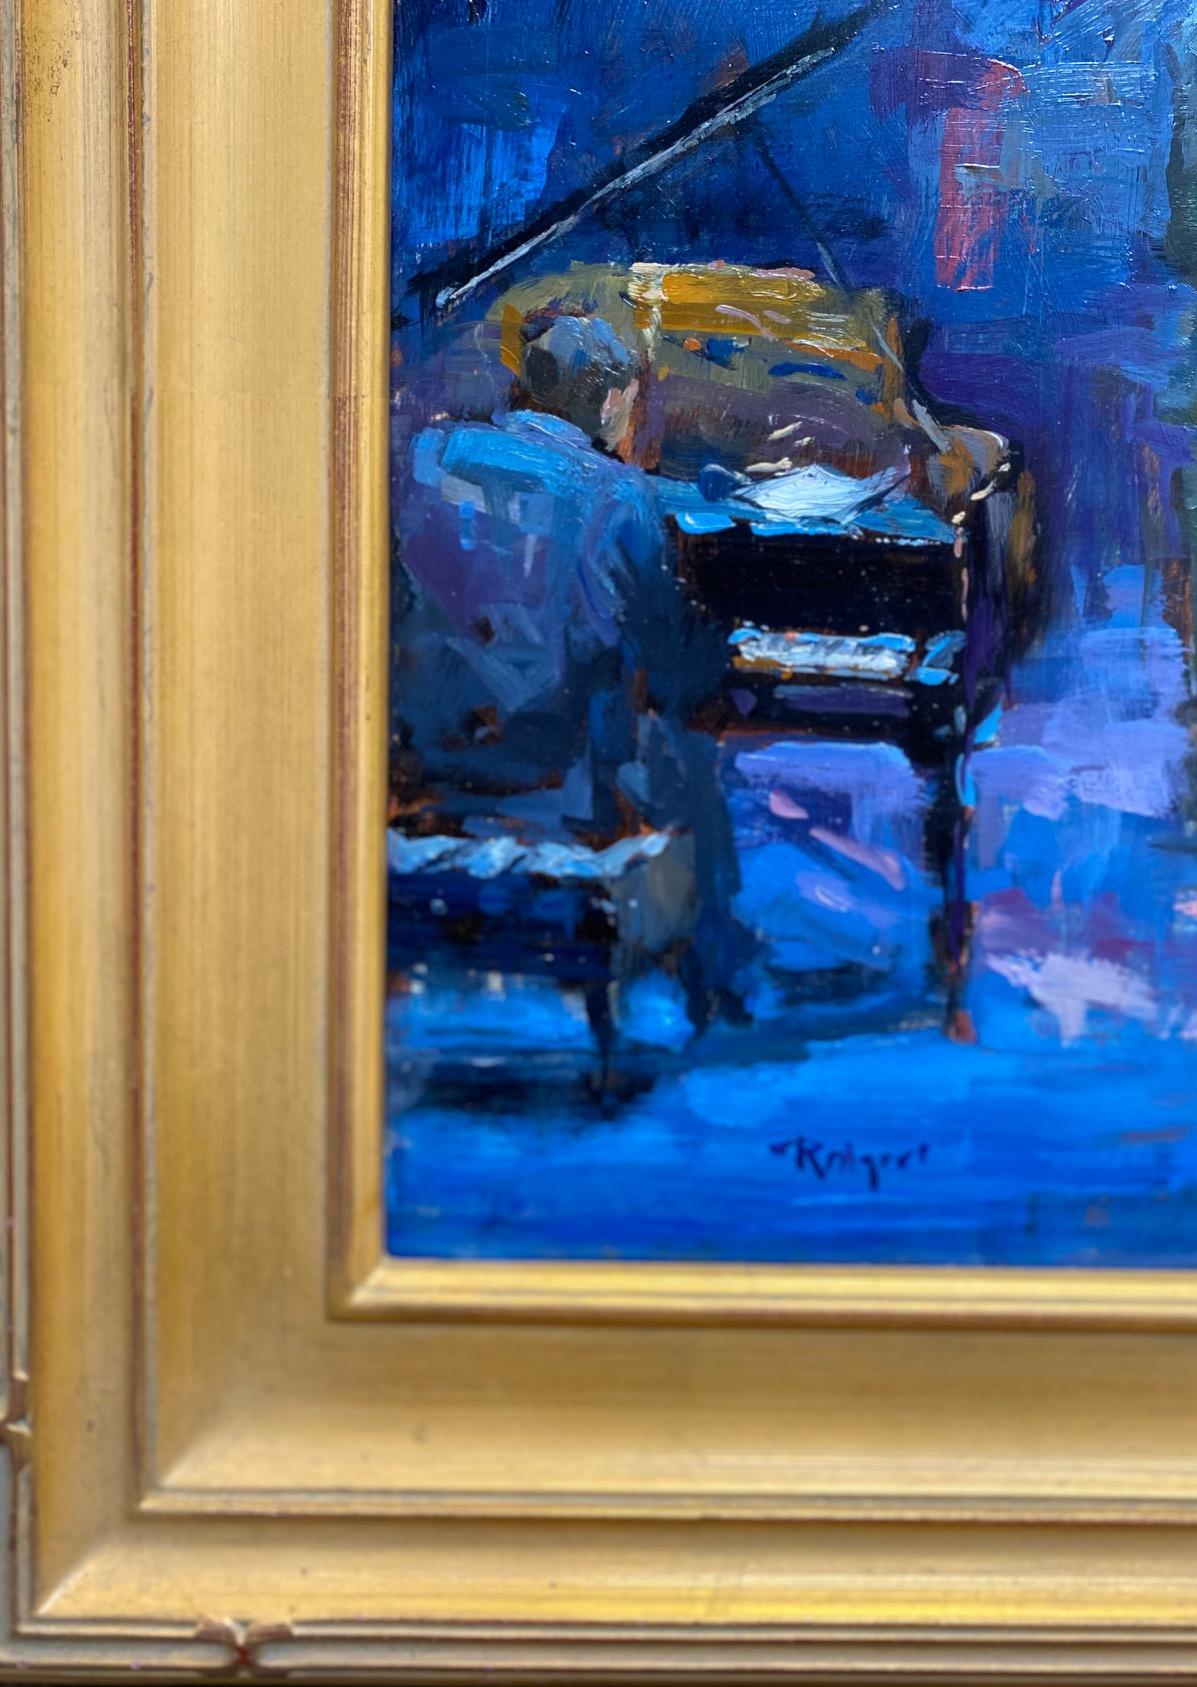 You can hear and feel the blues and jazz permeating throughout the club, exploding with mood and emotion.  The artists interactions are both well practiced and free from constraints.  Artist Jim Rodgers uses bold, impressionist brushstrokes to